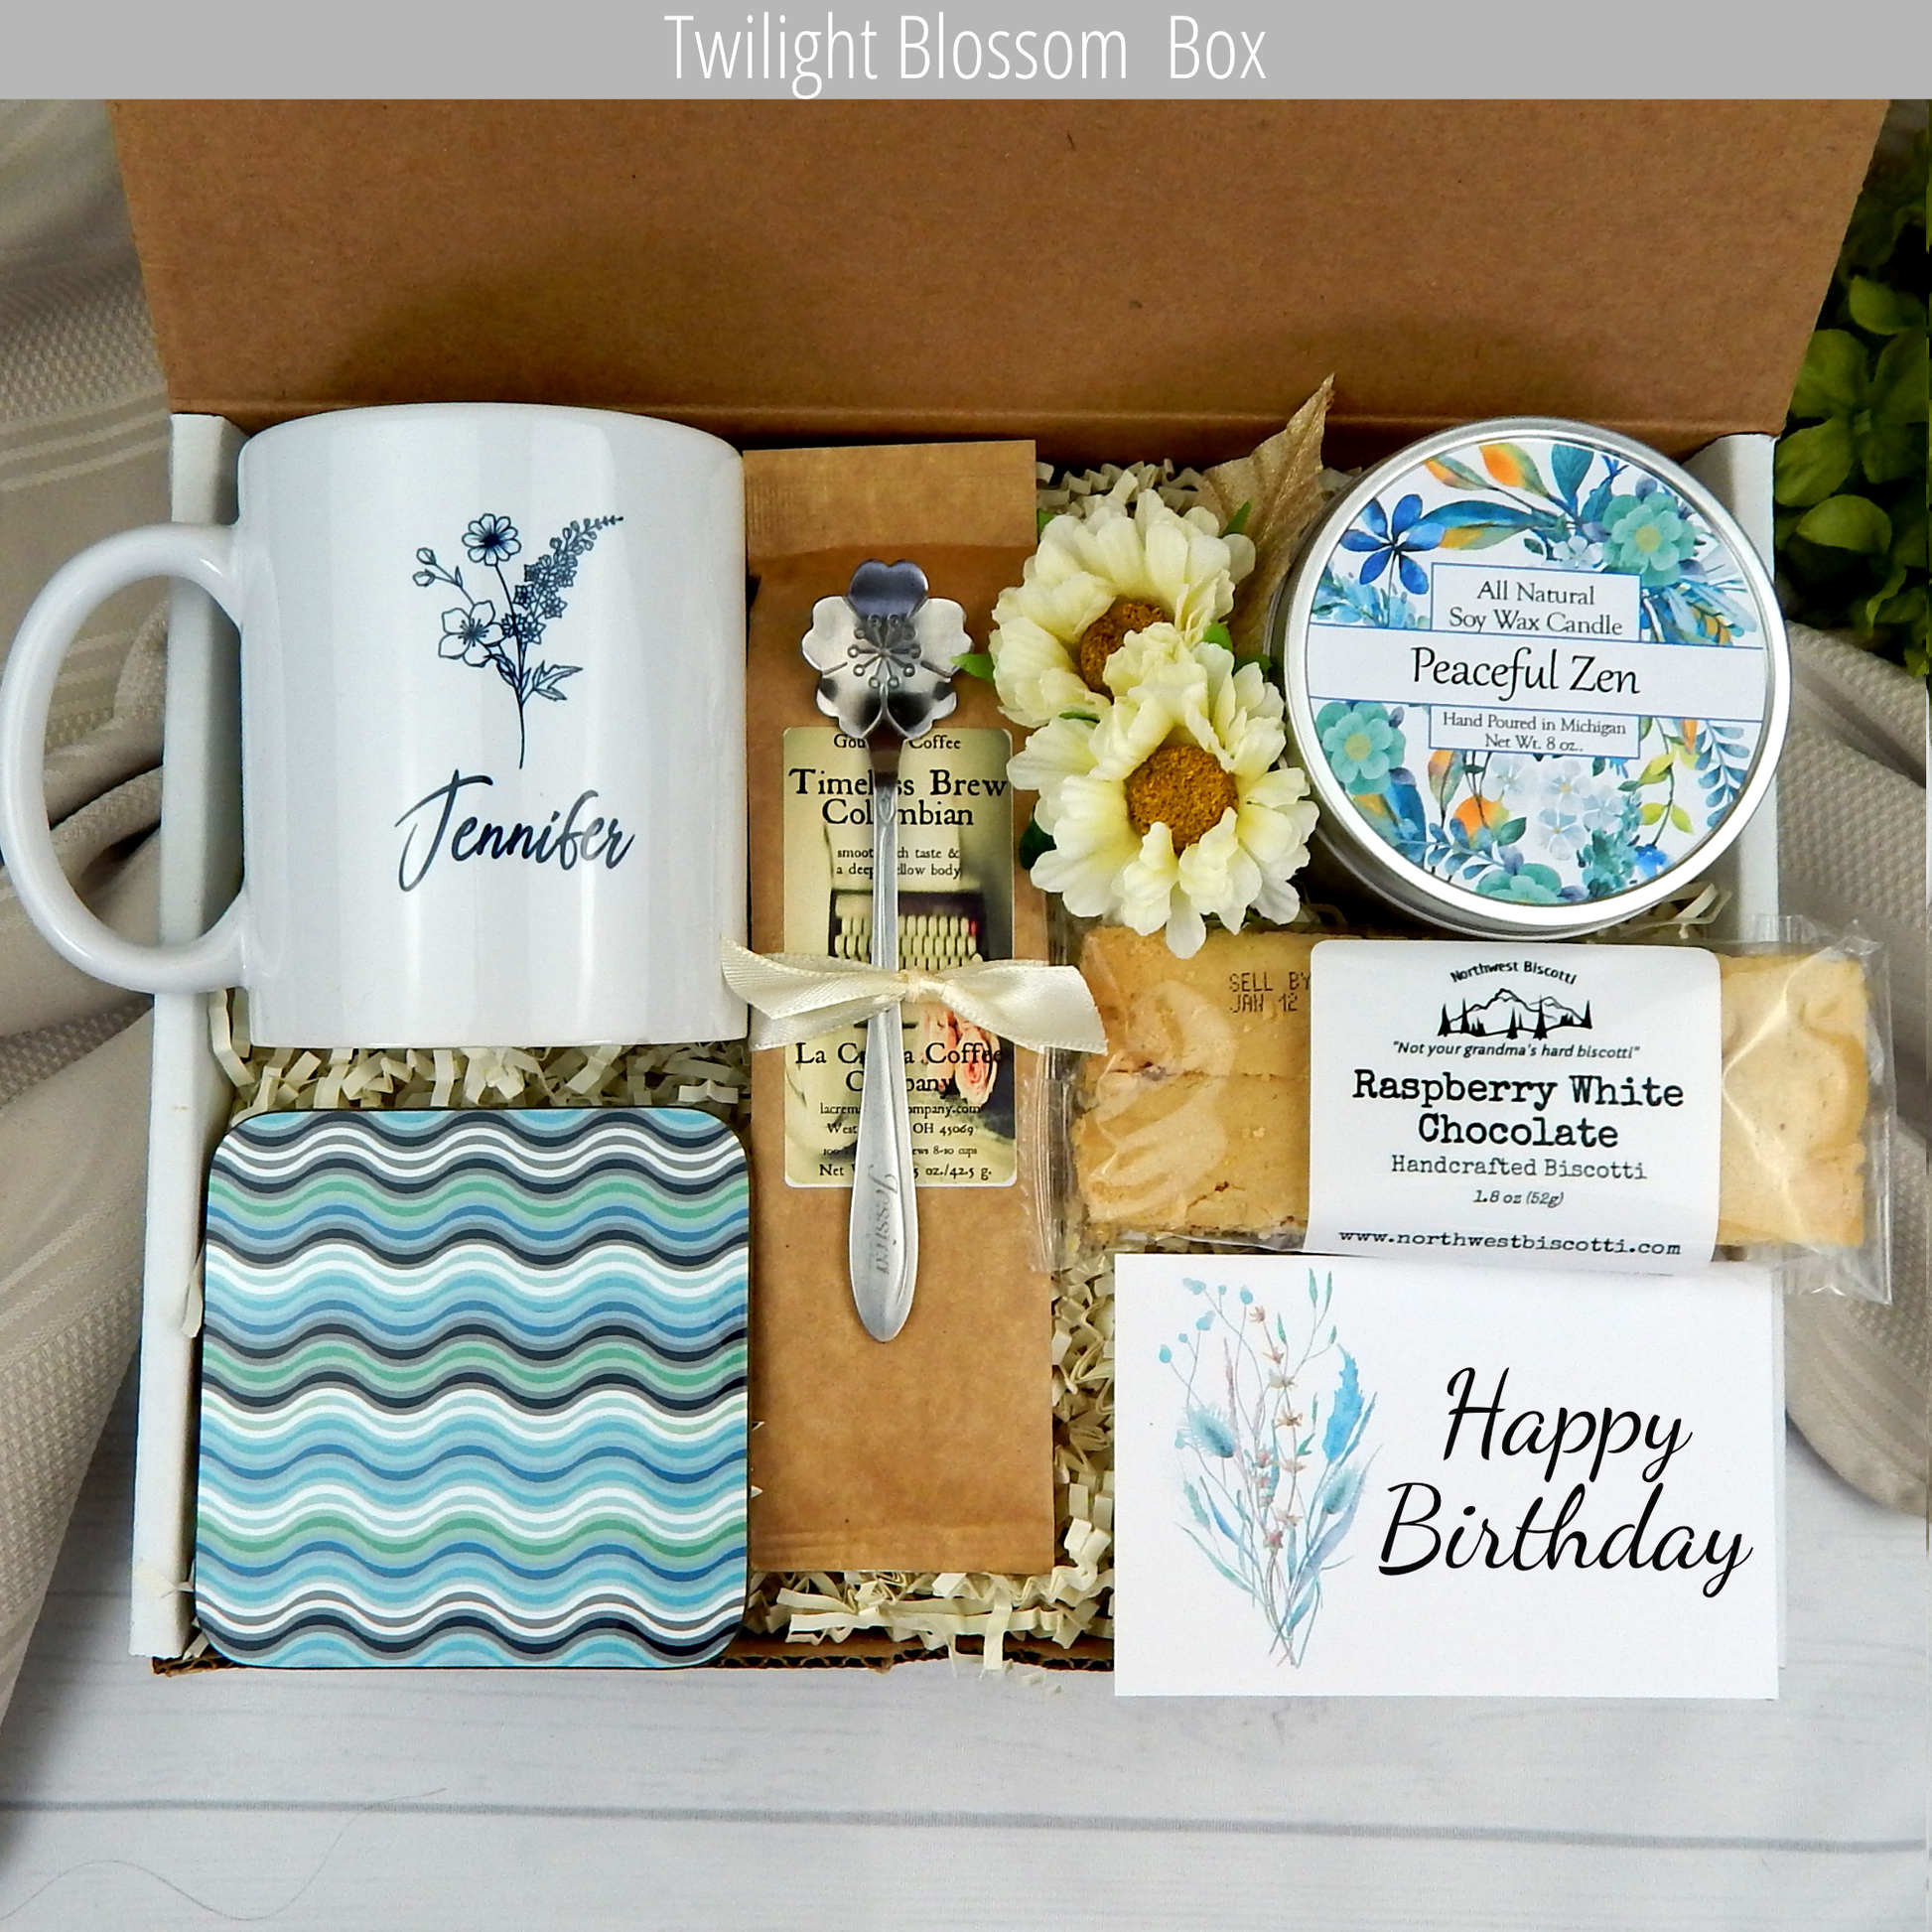 Celebration in a basket: Customized coffee and mug for her birthday